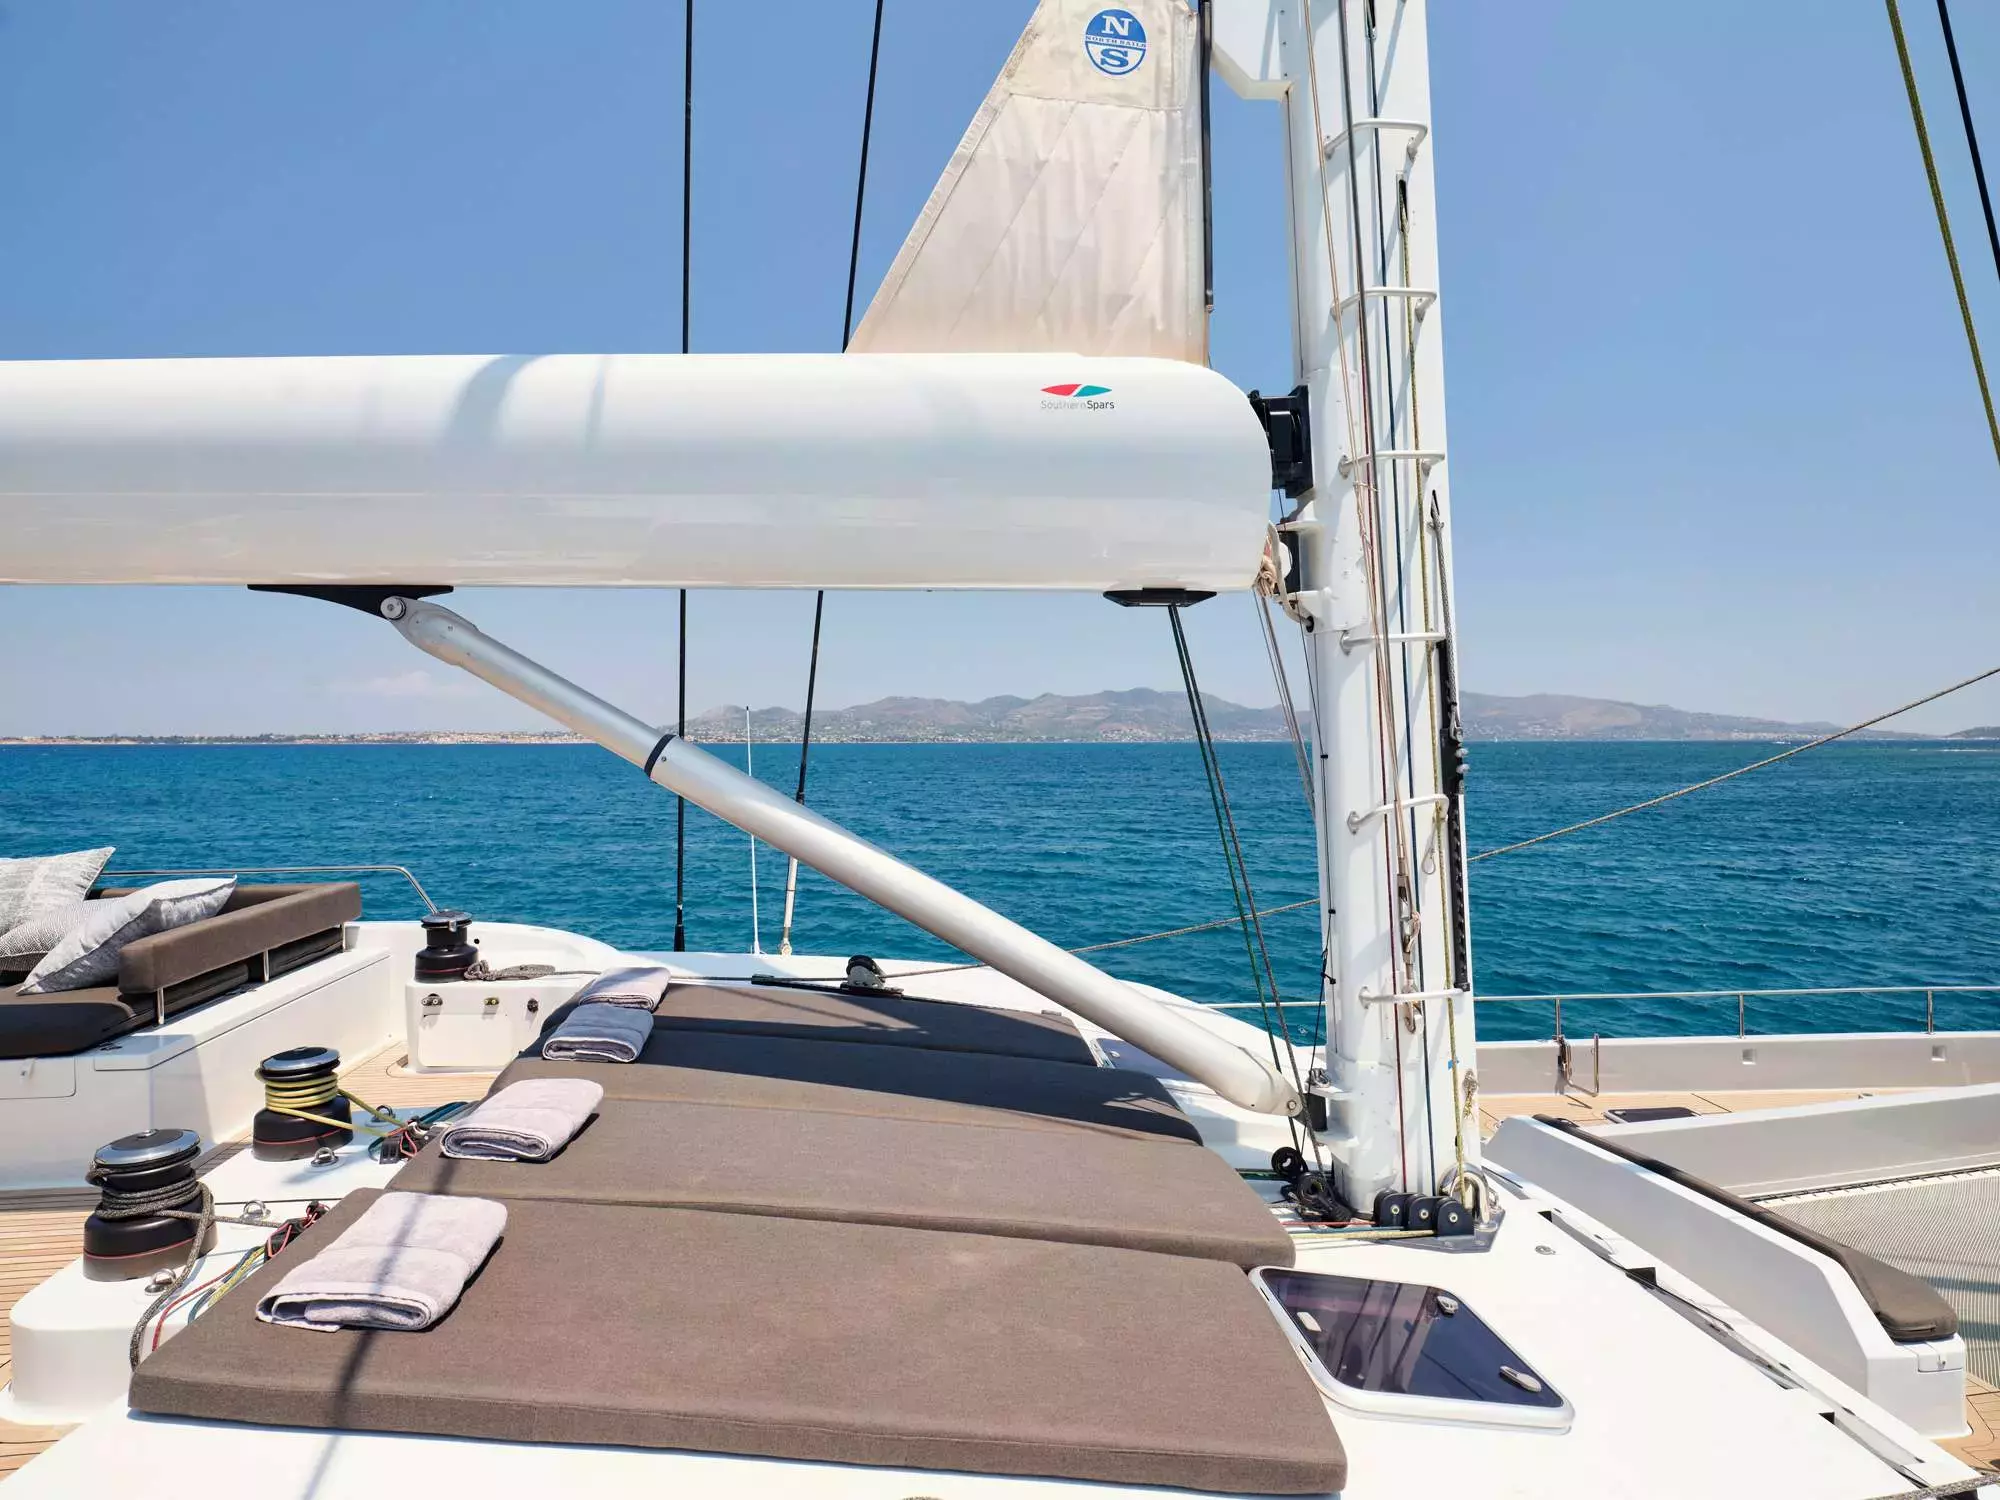 Sameli by Two Oceans - Special Offer for a private Sailing Catamaran Rental in Sifnos with a crew